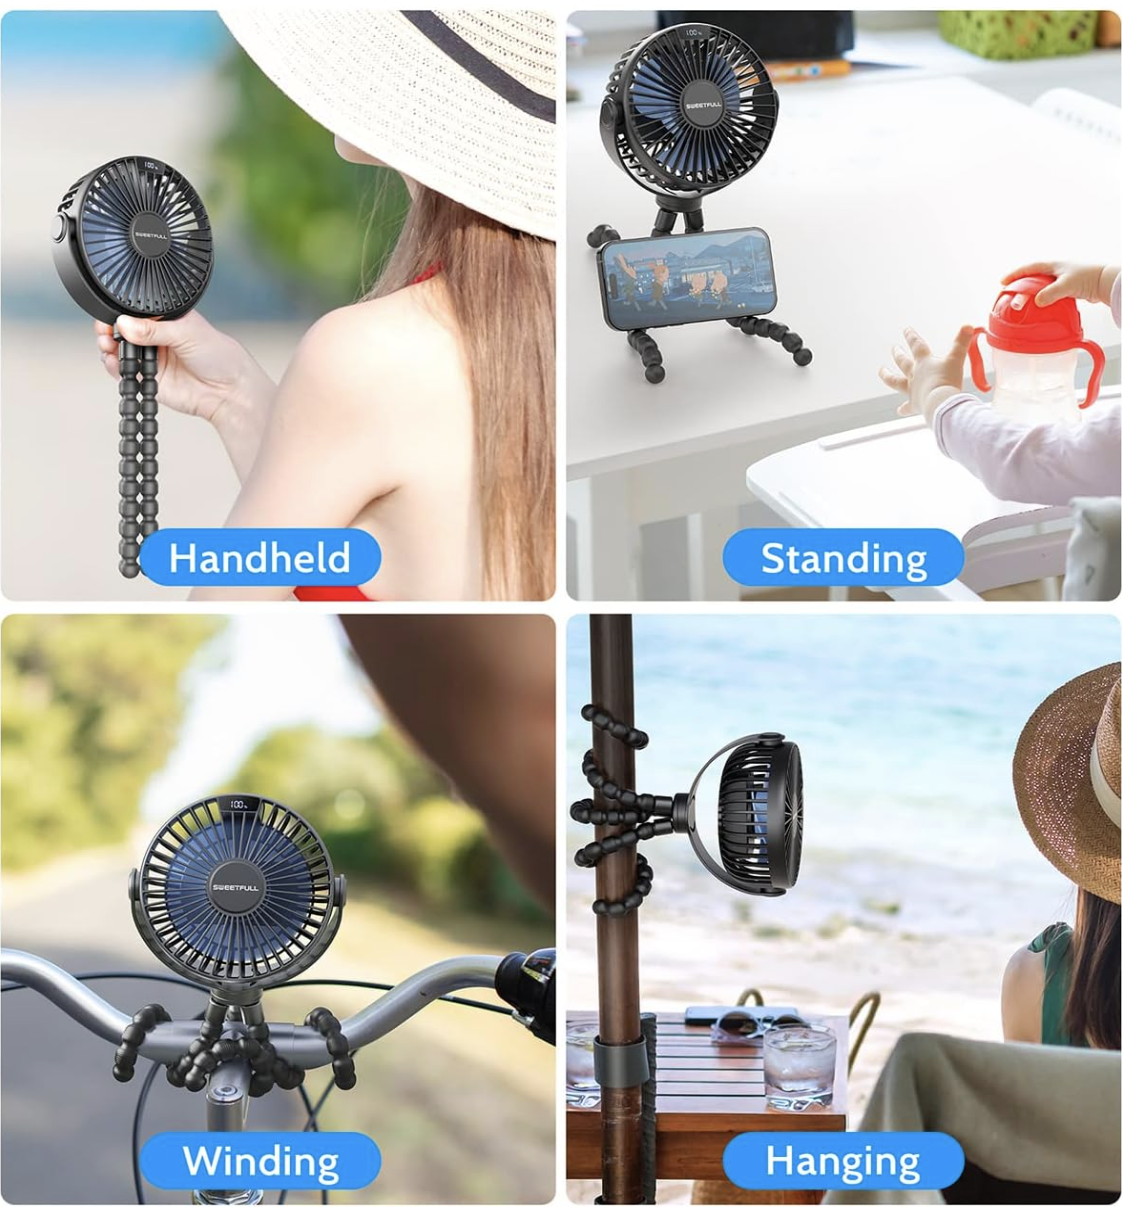 a portable fan shown 4 ways: on a bike handlebar outside, hanging at a beach, standing and holding a phone, and a woman in a hat holding it